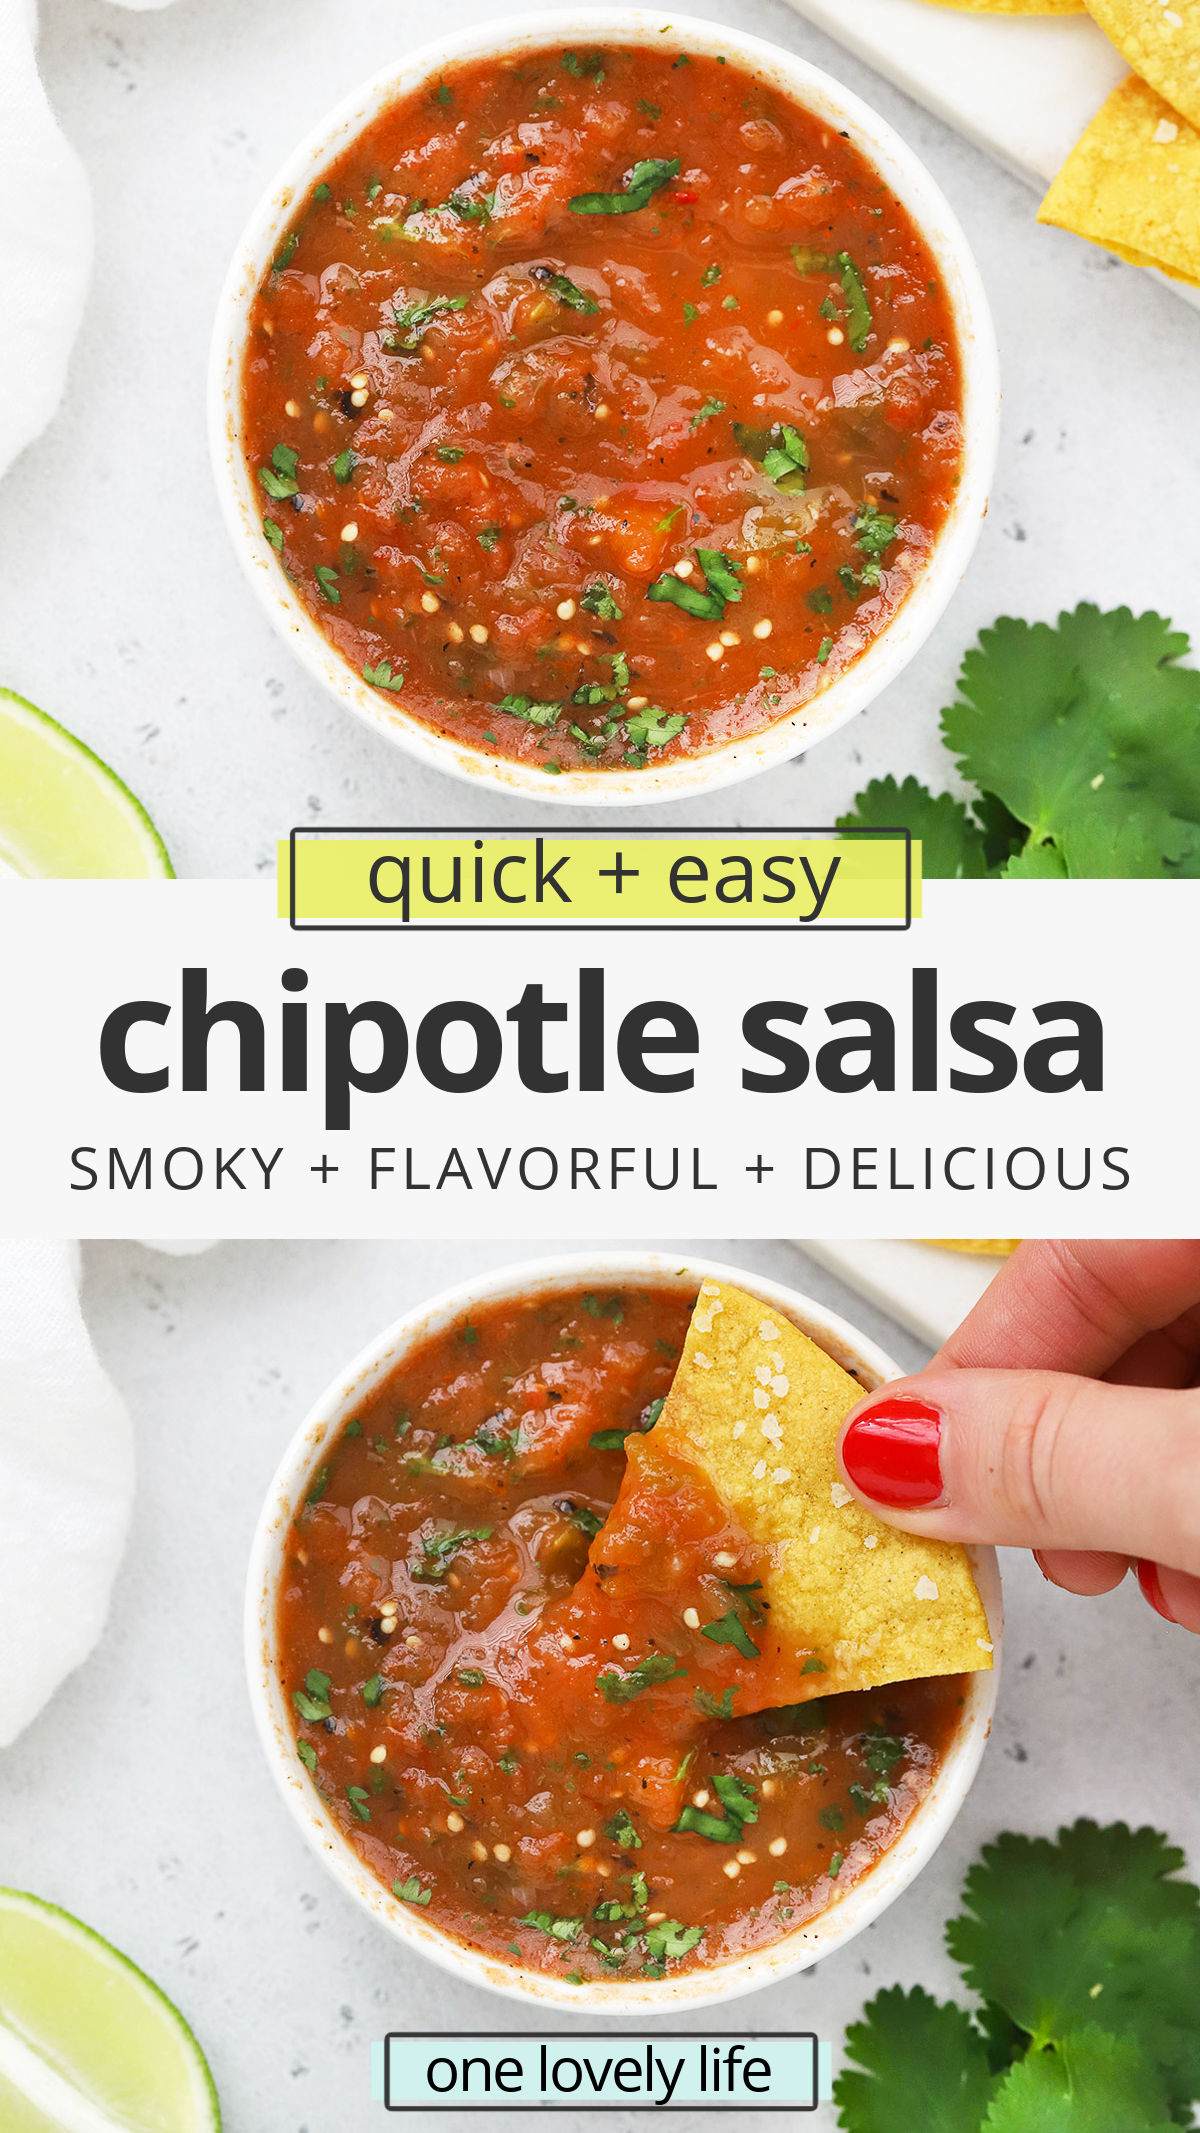 This Smoky Chipotle Salsa rivals our favorite restaurant salsa and tastes good on EVERYTHING. Mexican Restaurant Salsa Recipe // Salsa Roja // Tomato Tomatillo Salsa // Homemade Salsa recipe #salsa #chipotlesalsa #glutenfree #texmex #vegan